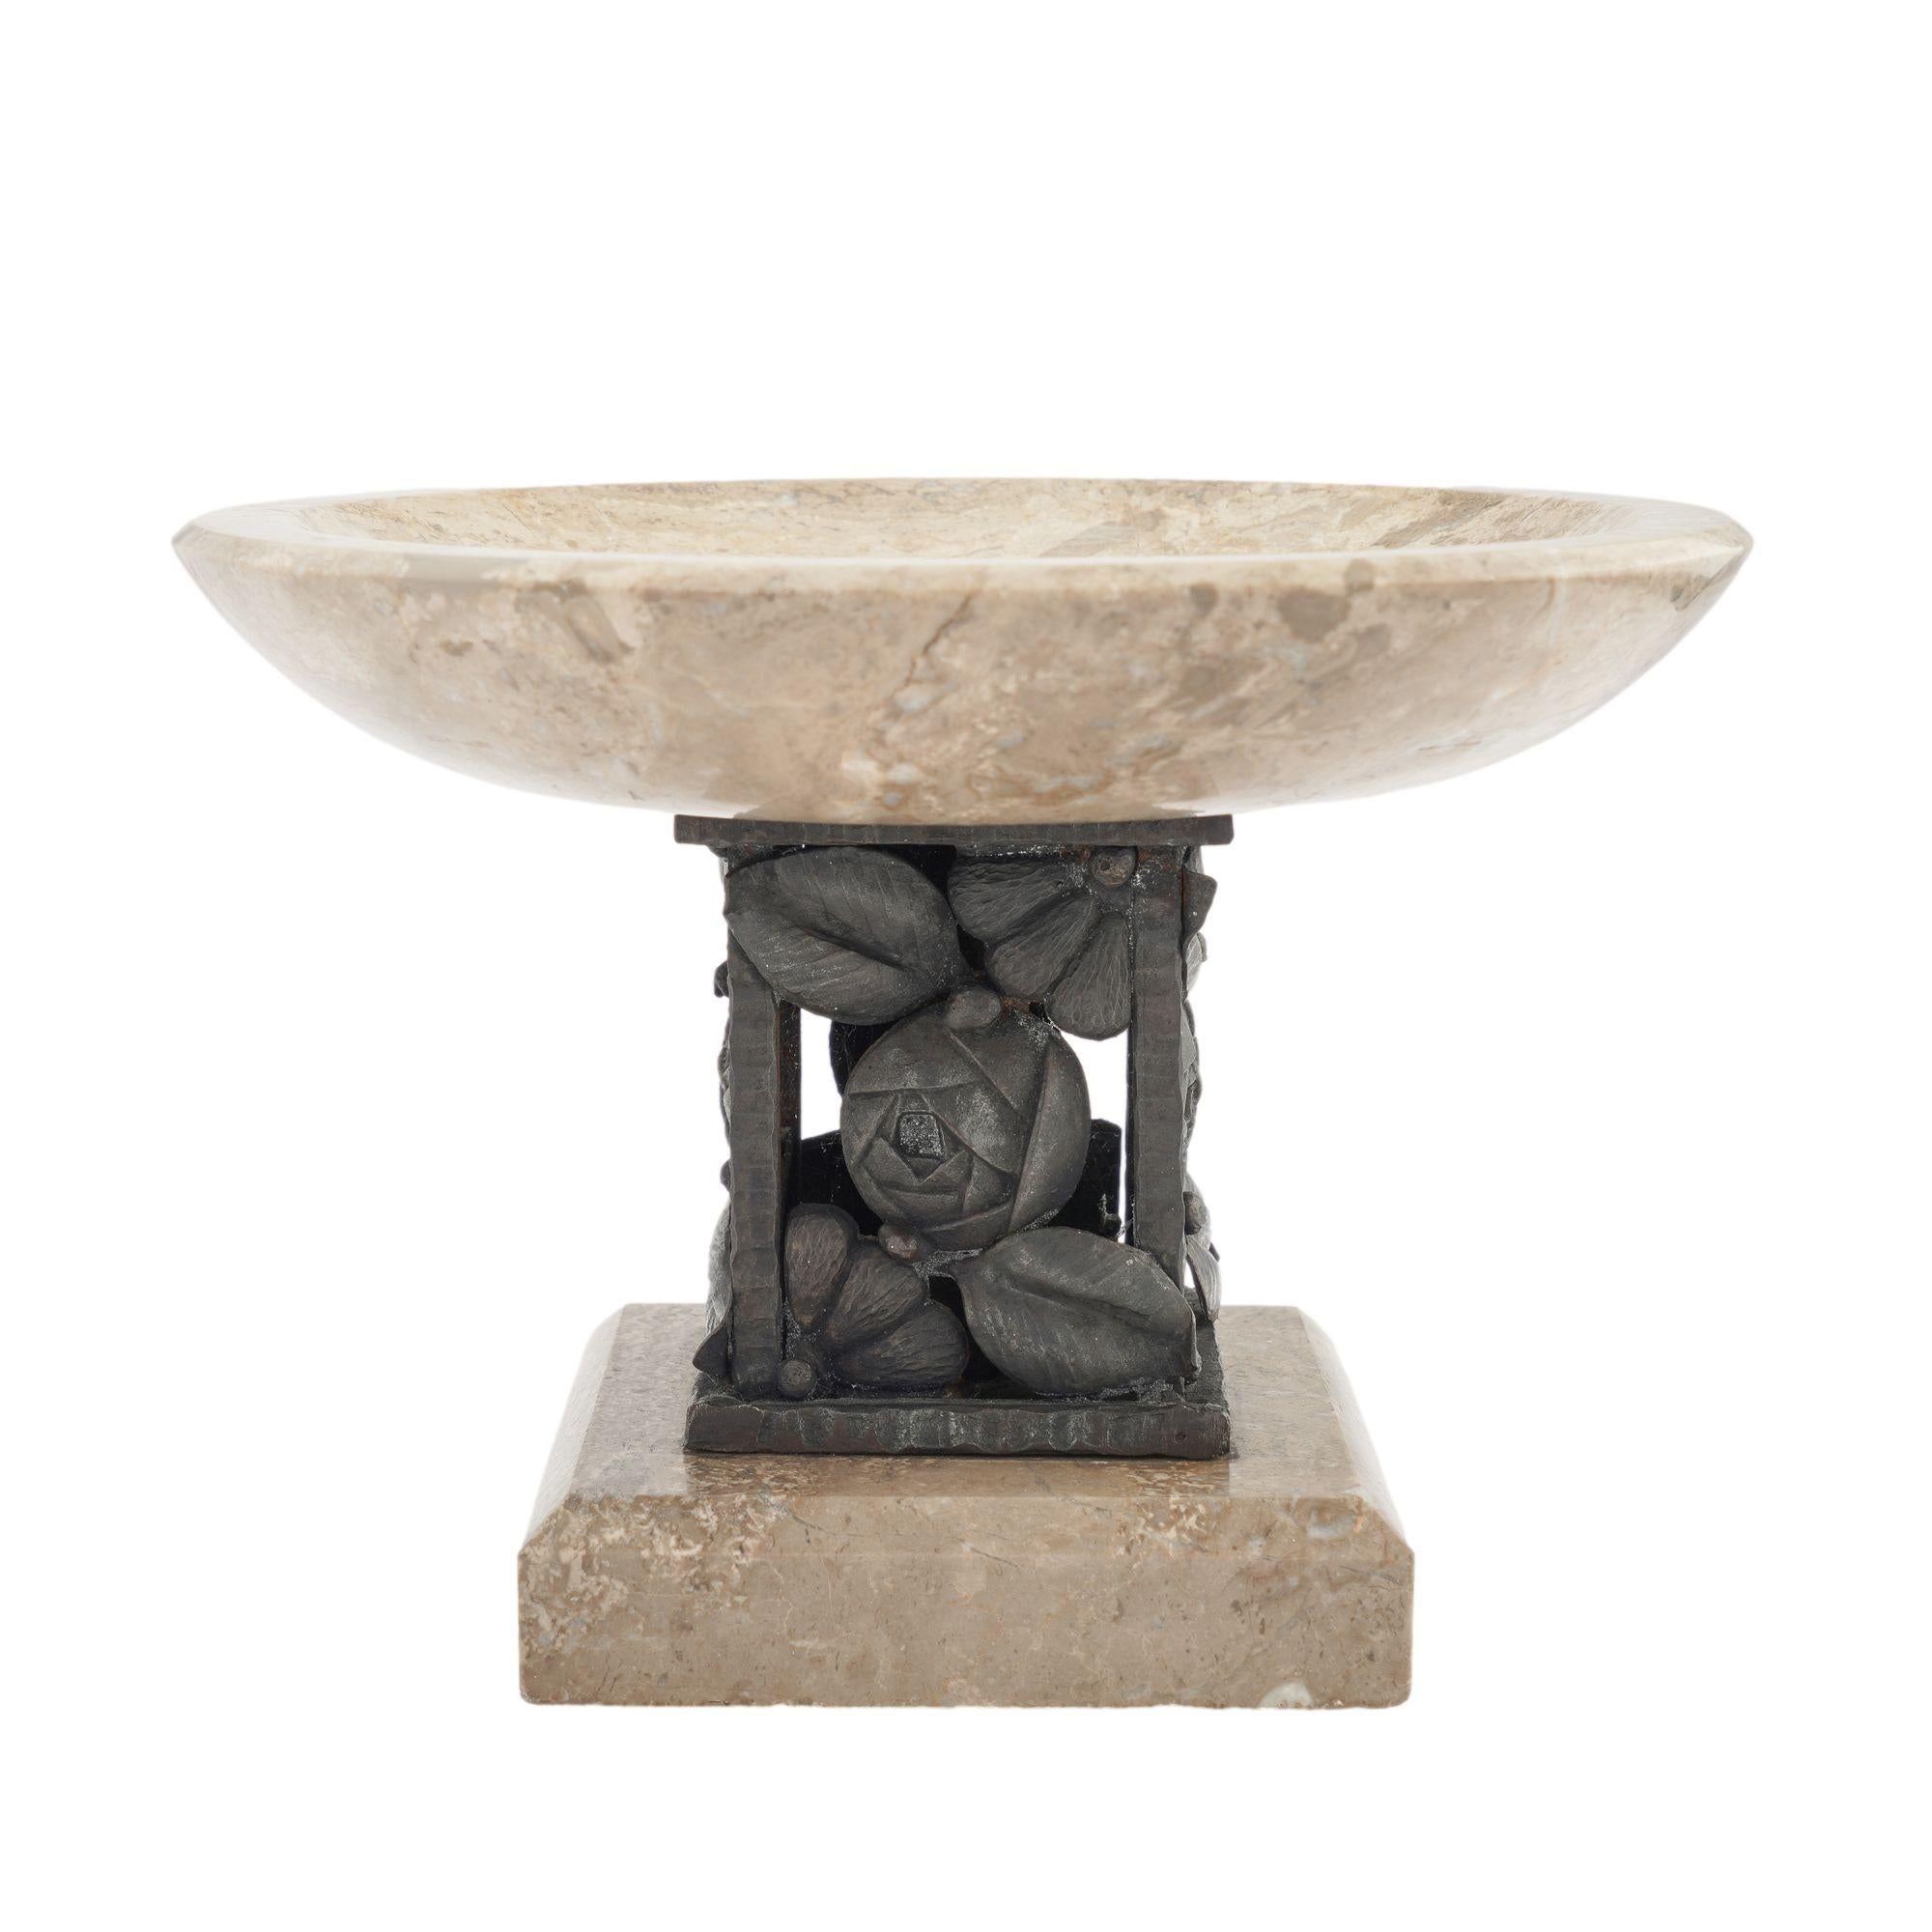 Marble and bronze Art Deco tazza. The cast bronze dish support features four alternating panels with a highly detailed flower surrounded by leaves that both overlap and recess around the corner columns, giving the piece a highly dimensional